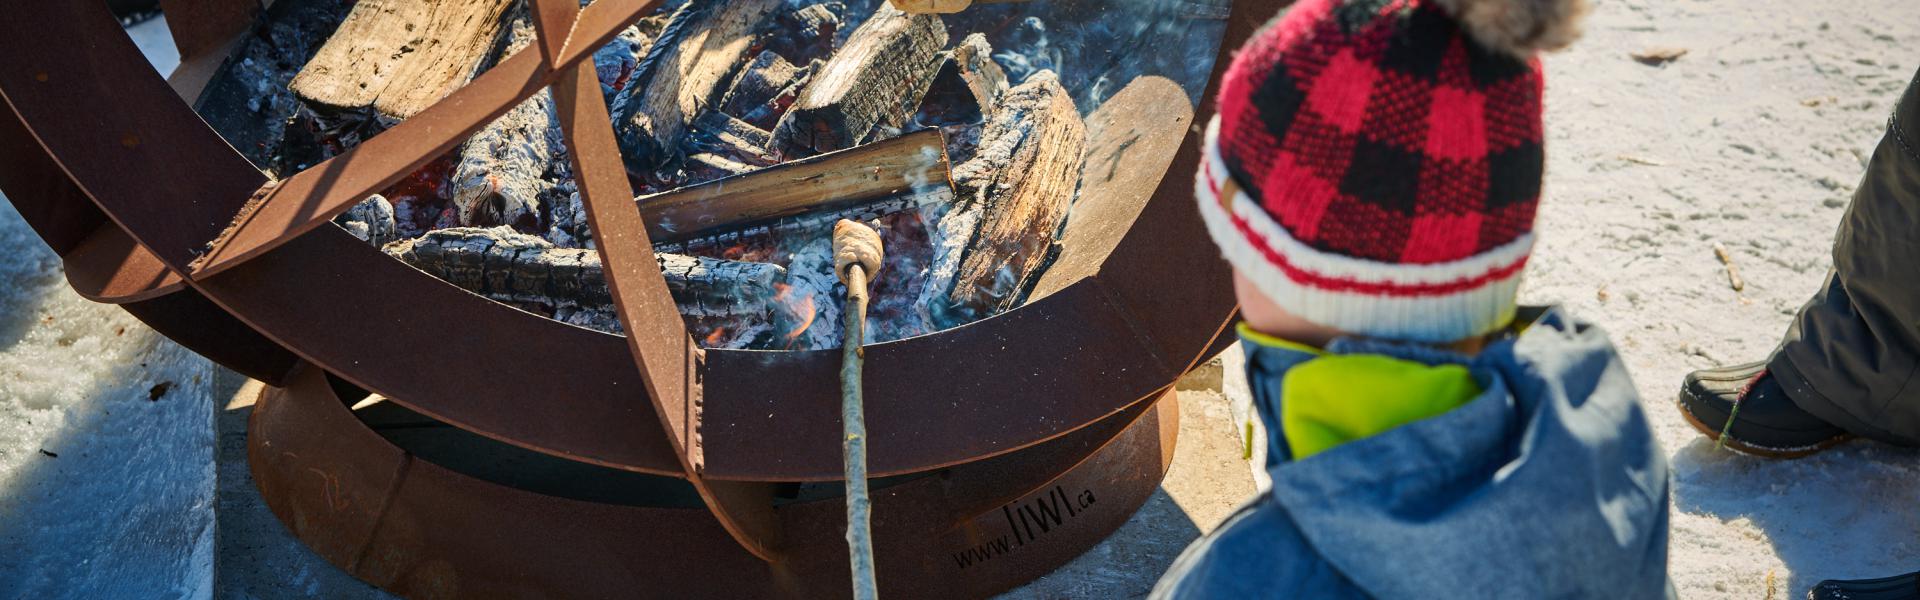 Boy in snow suit roasting bannock over bonfire at an event